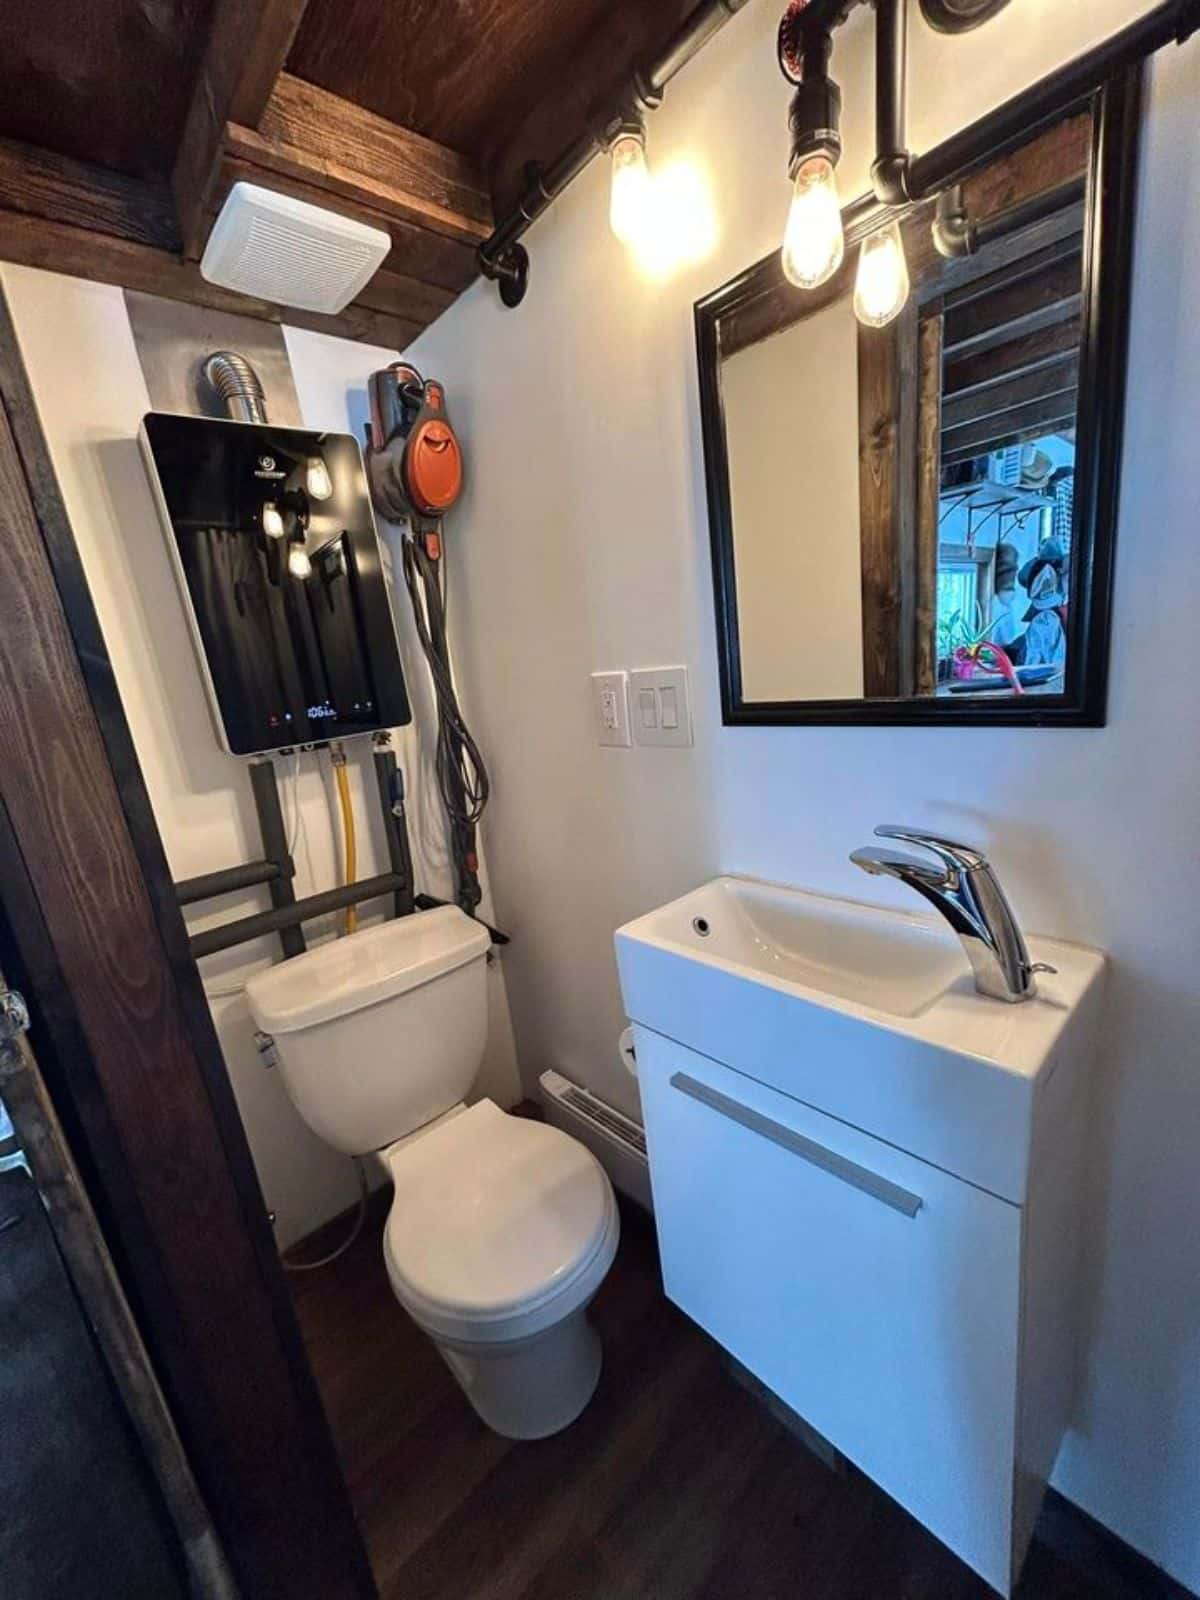 standard toilet and water heater installed in bathroom